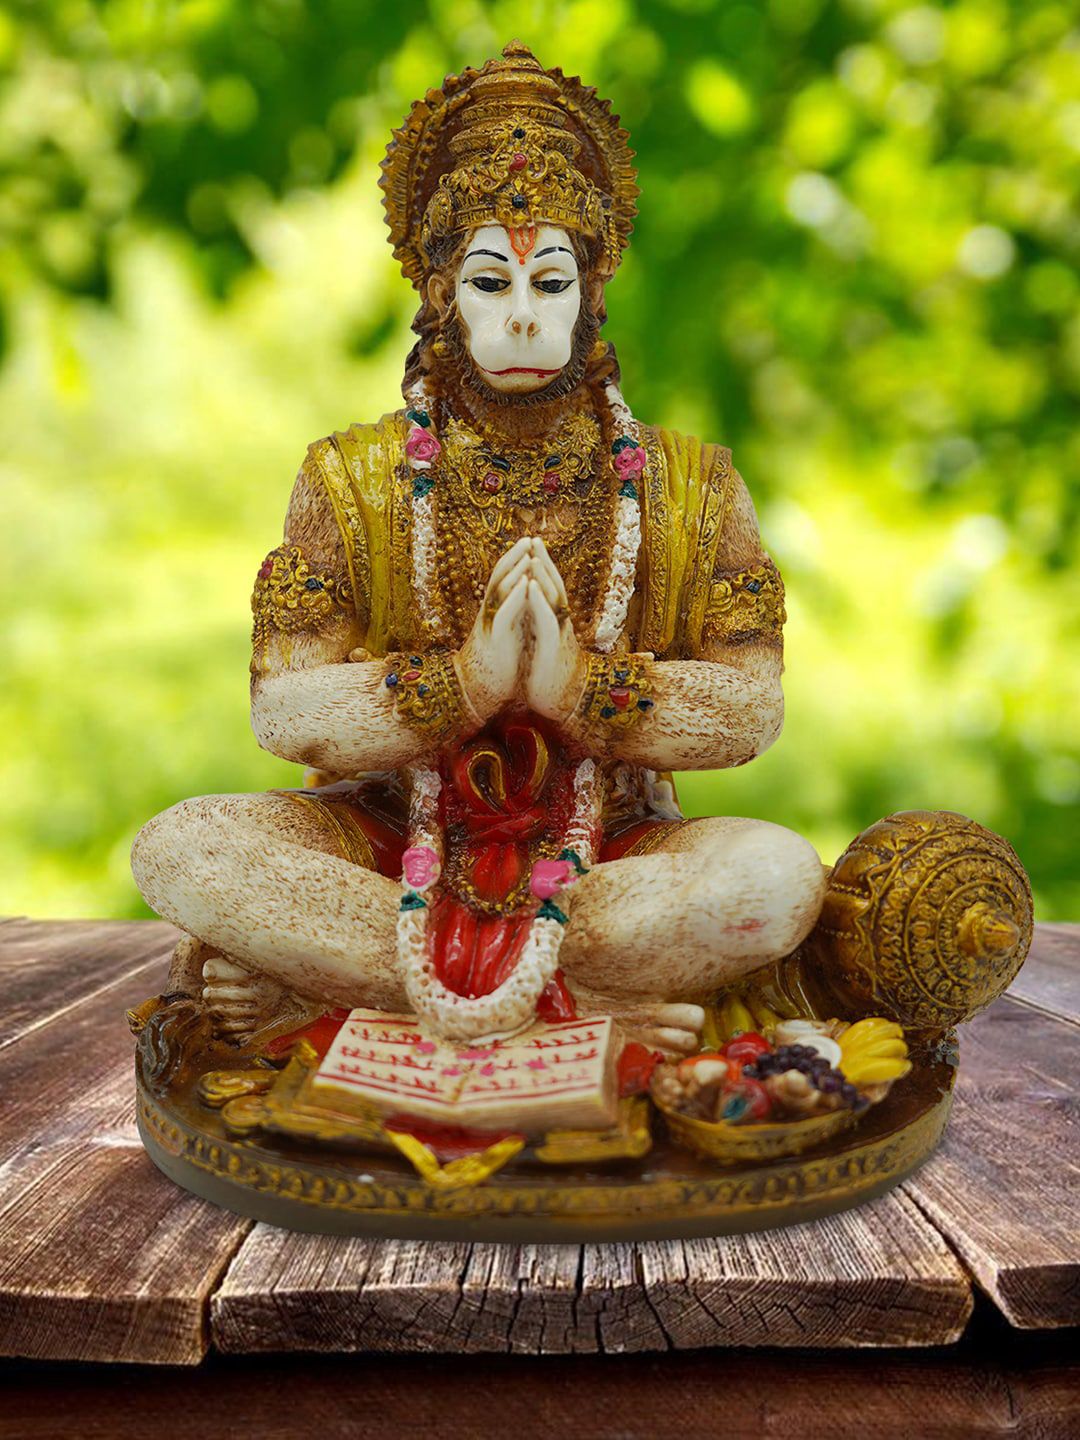 Gallery99 Gold-Toned & white Handpainted Lord Hanuman Showpiece Price in India